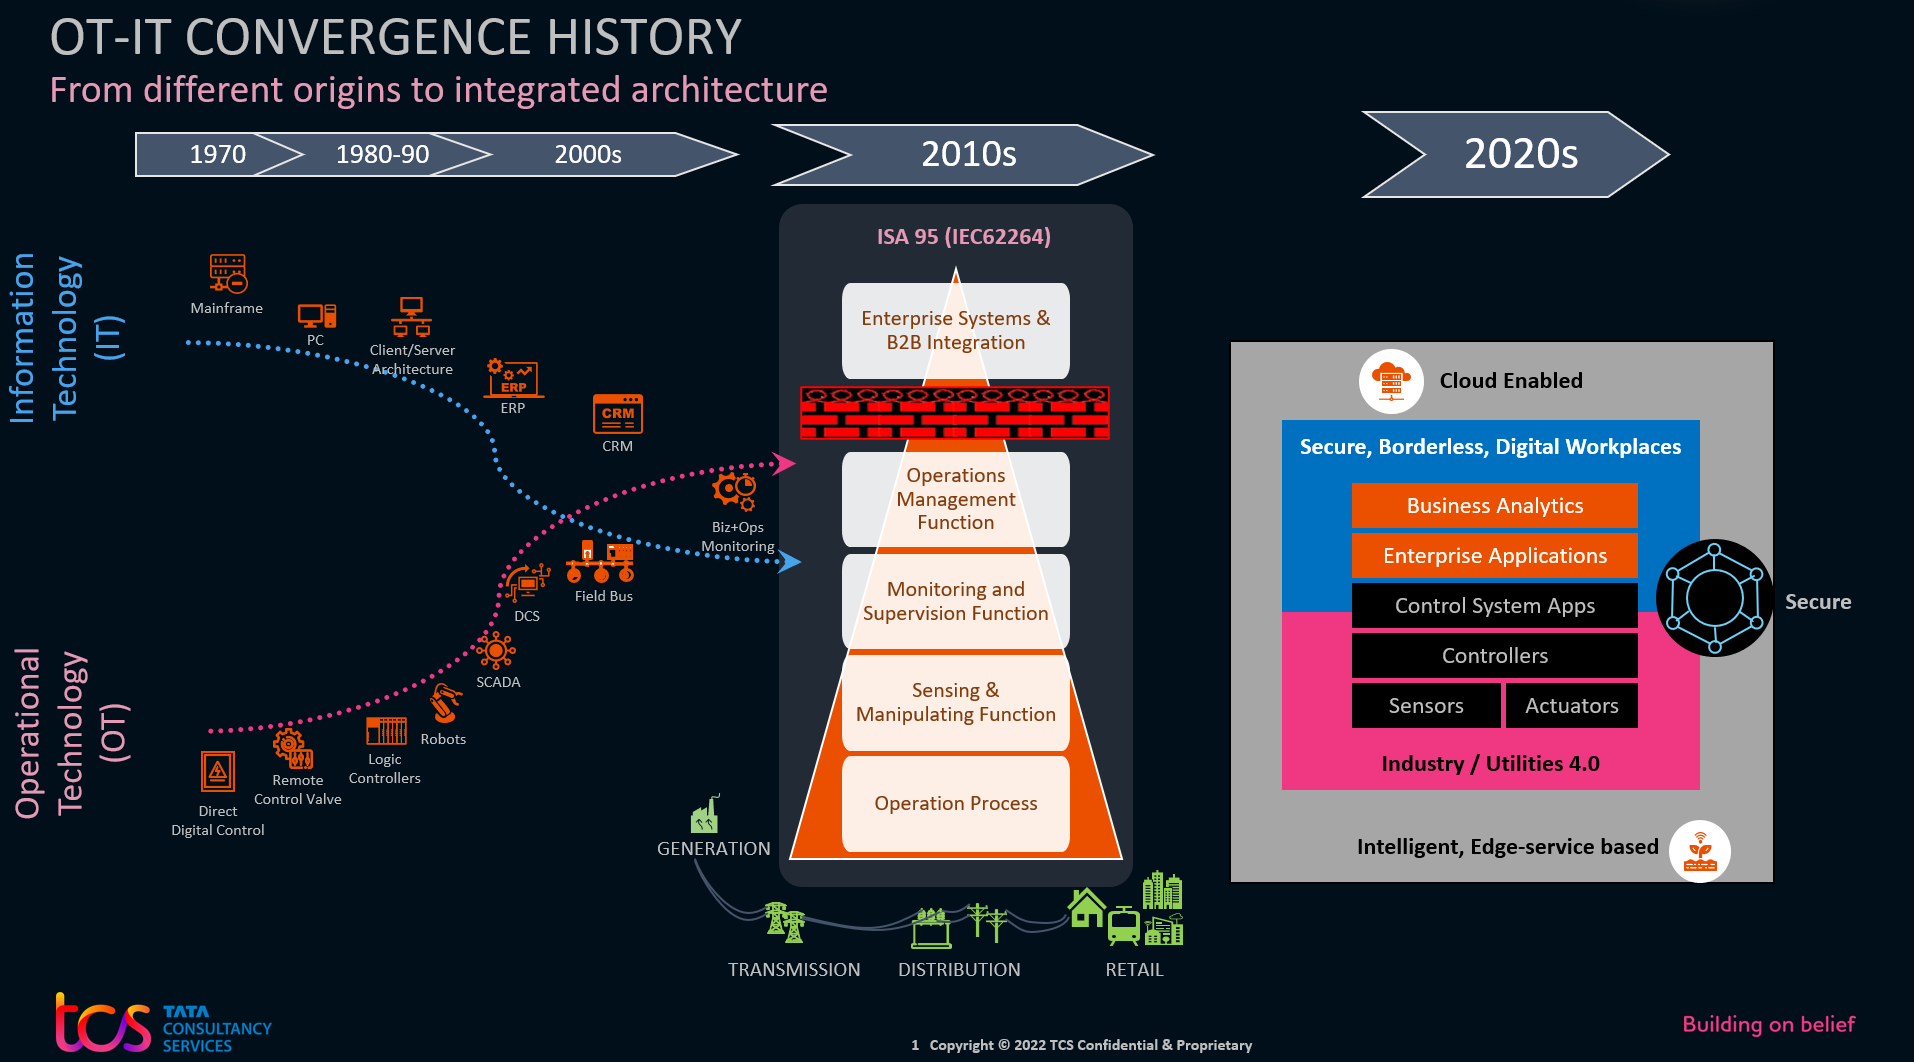 Mapping the IT-OT convergence journey over the decades